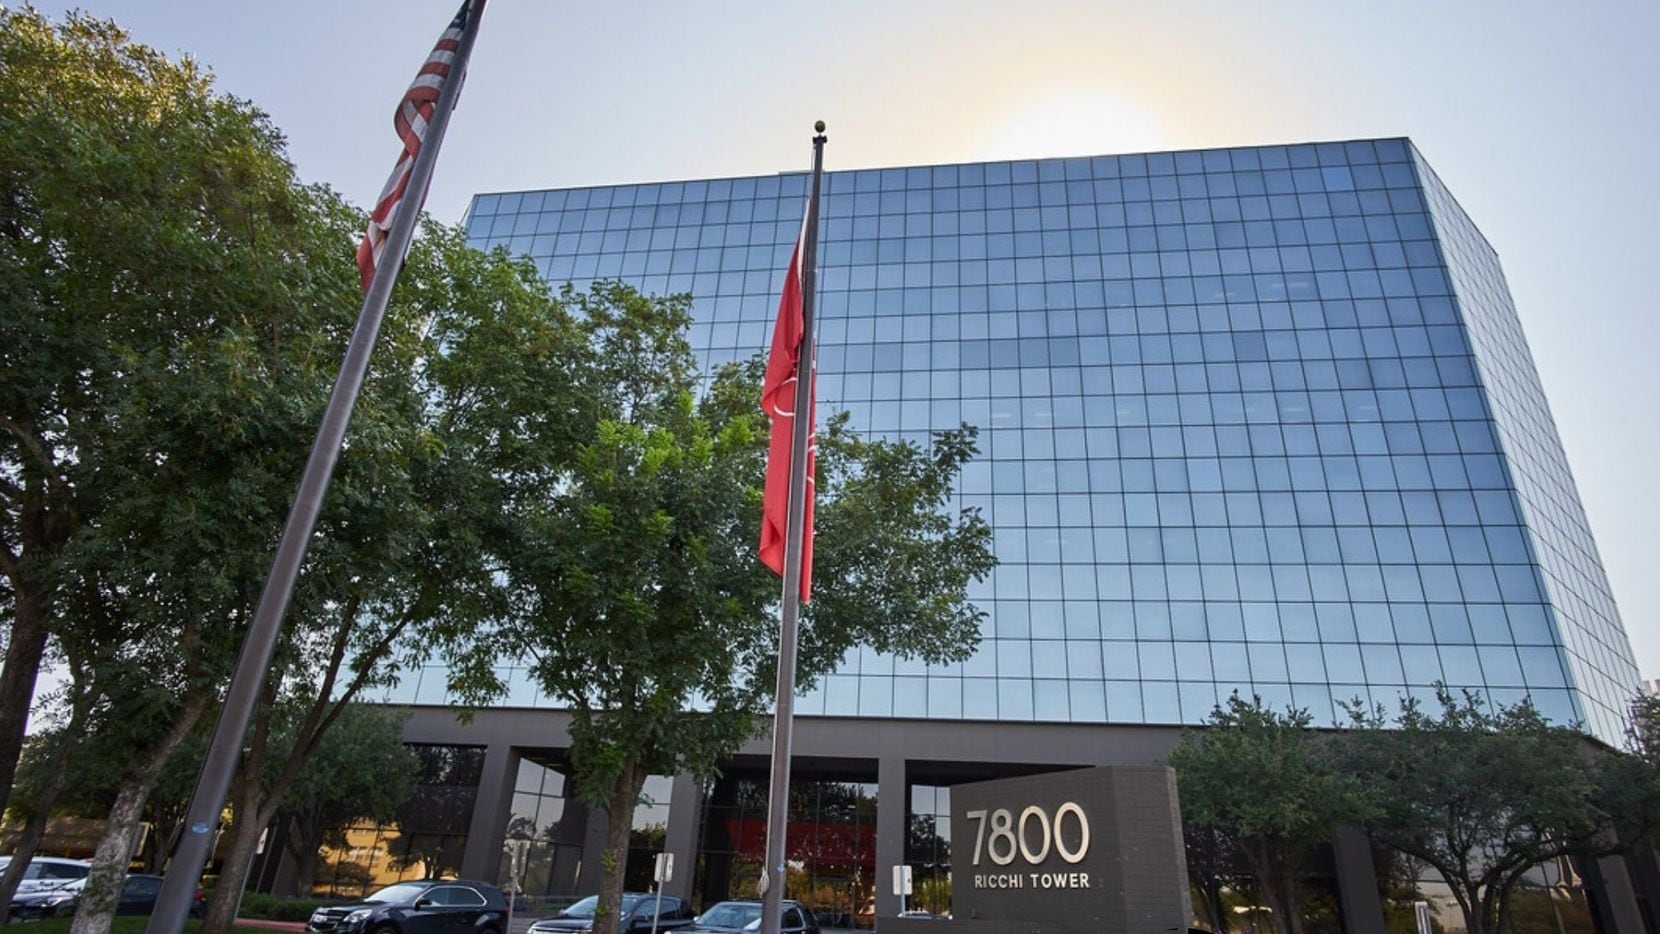 The city of Dallas is paying more than $14 million to buy the Ricchi Tower at 7800 Stemmons...